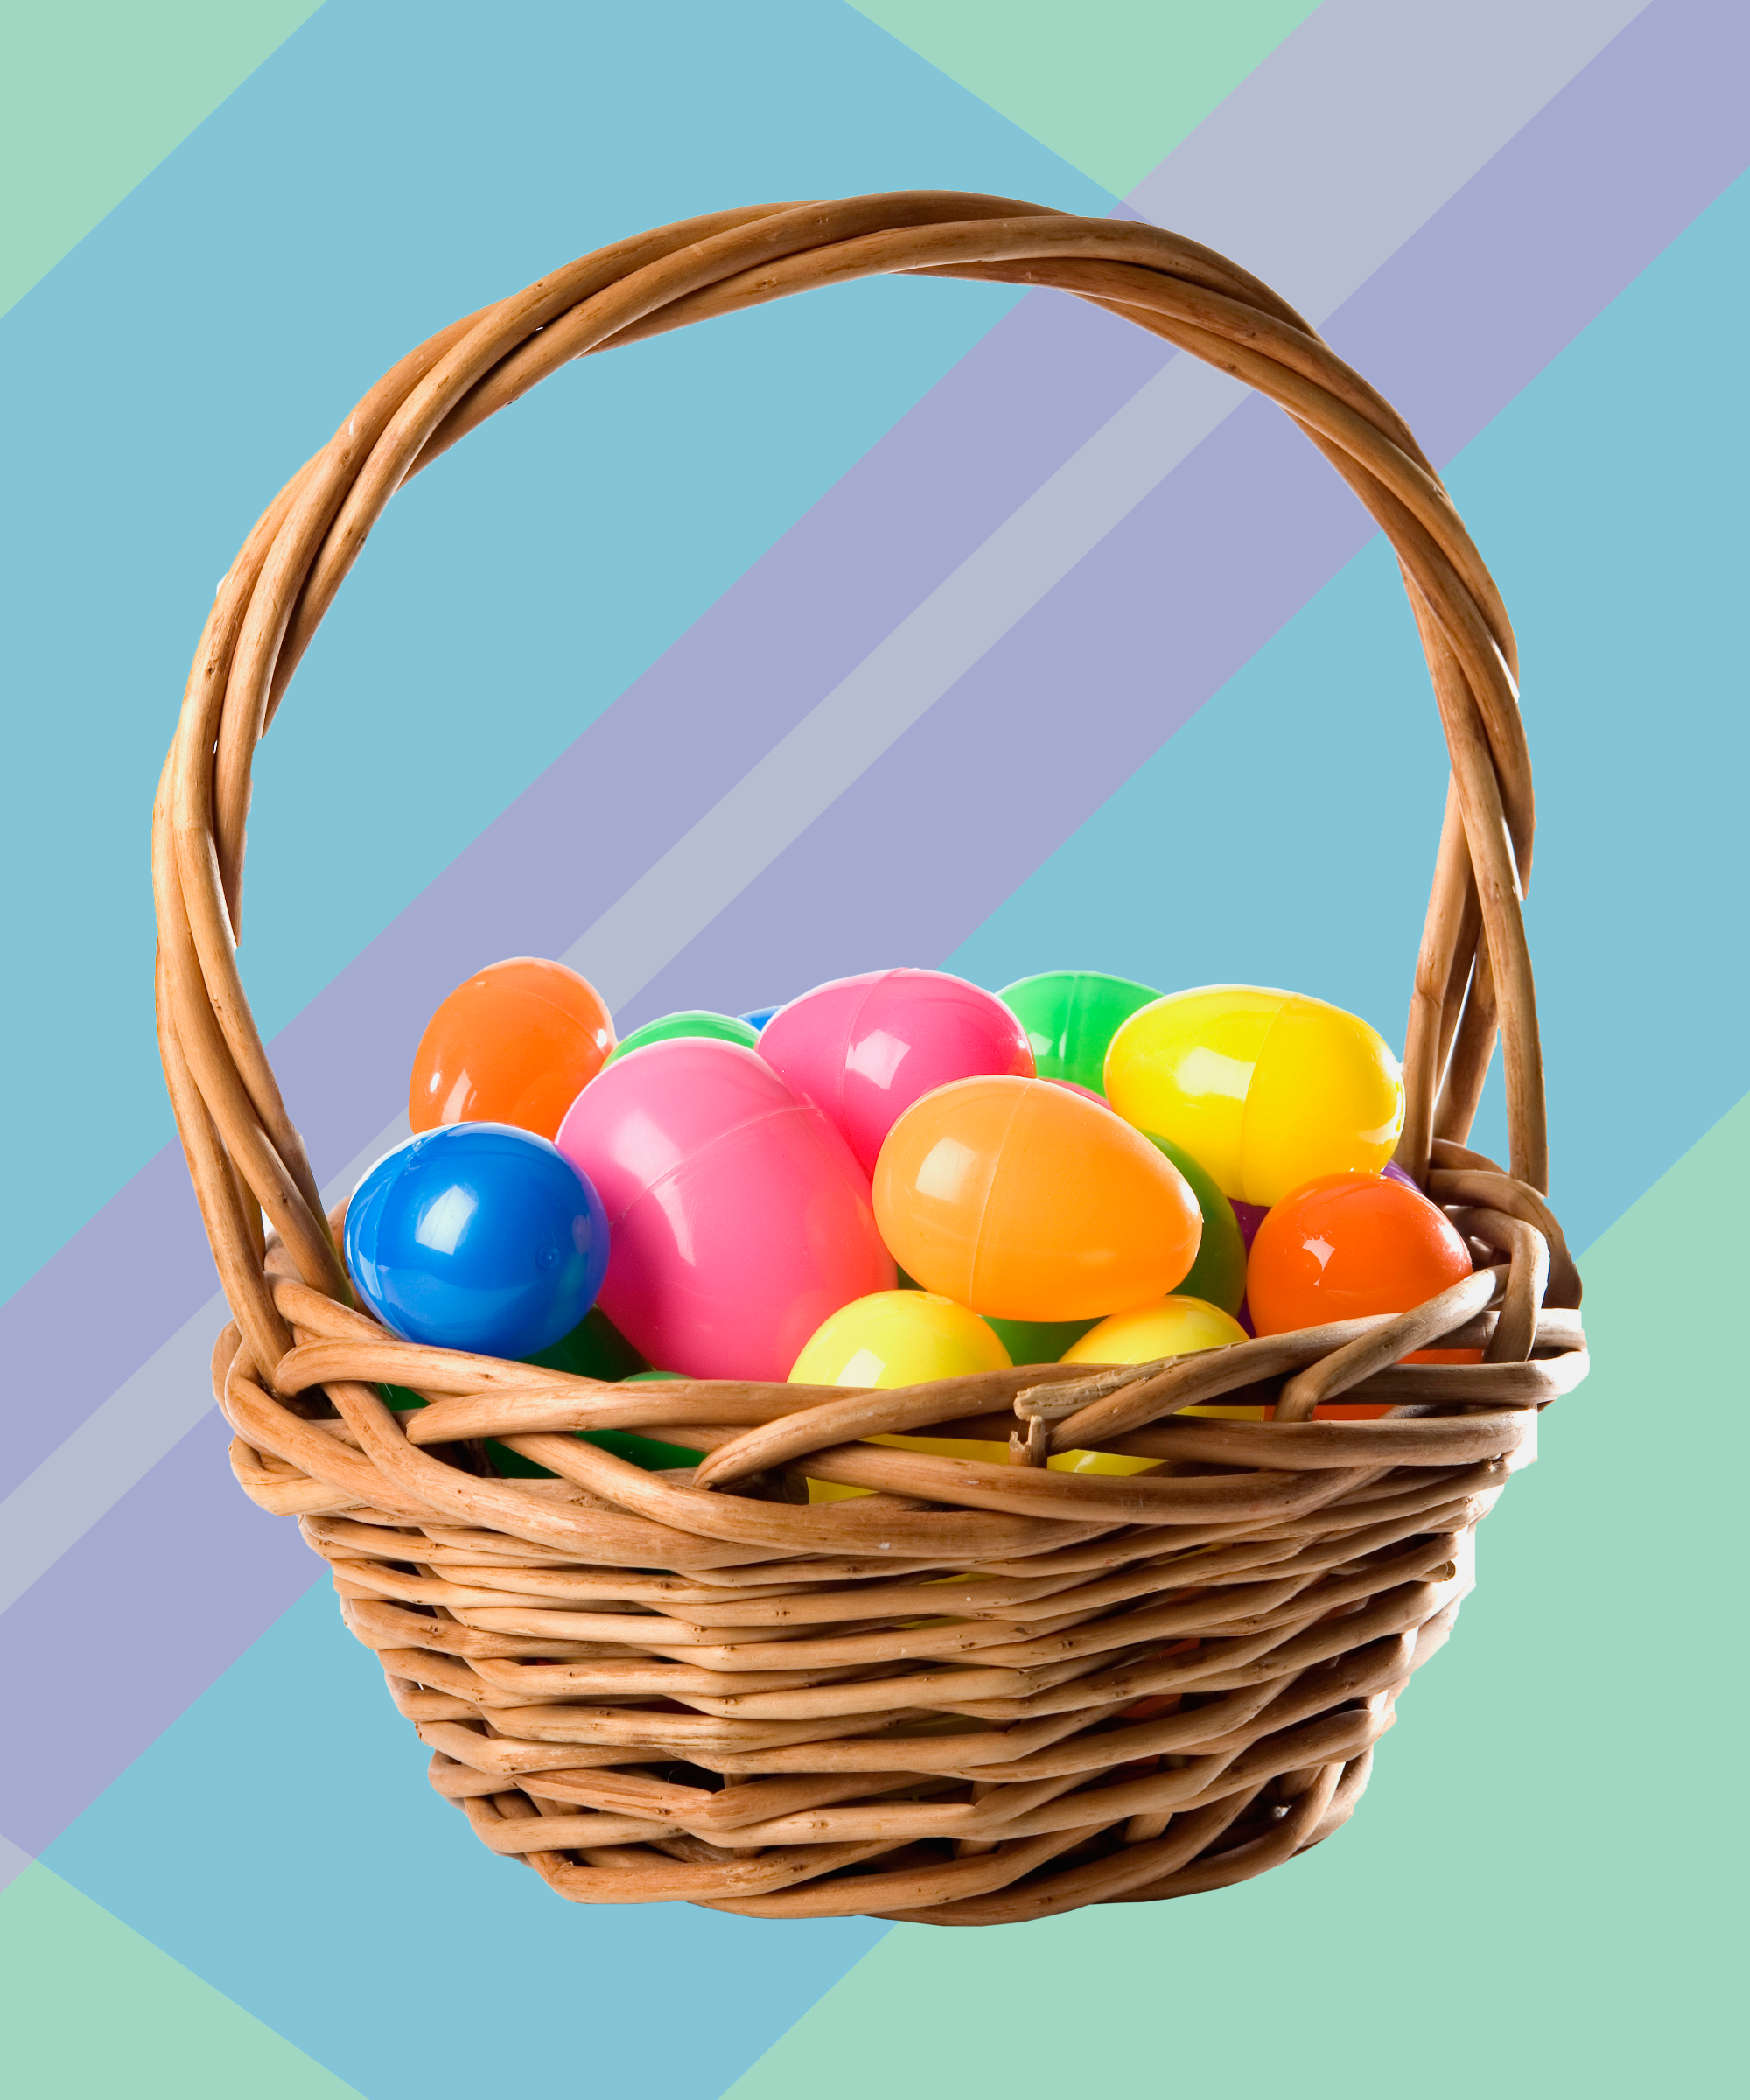 Cheese Easter Egg For Basket Cheester